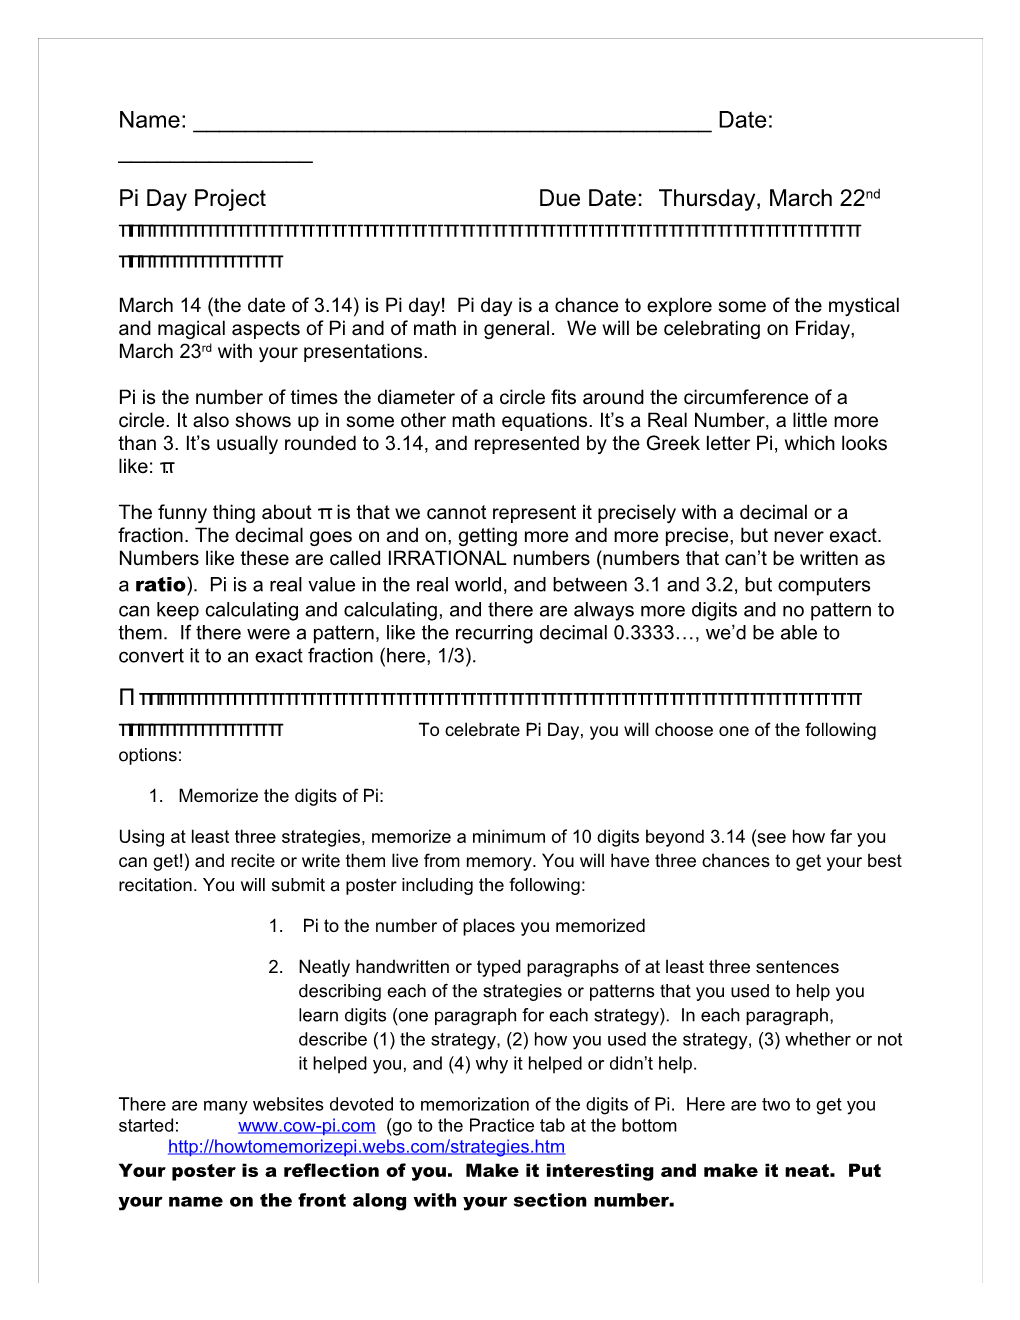 Pi Day Project Due Date: Thursday, March 22Nd